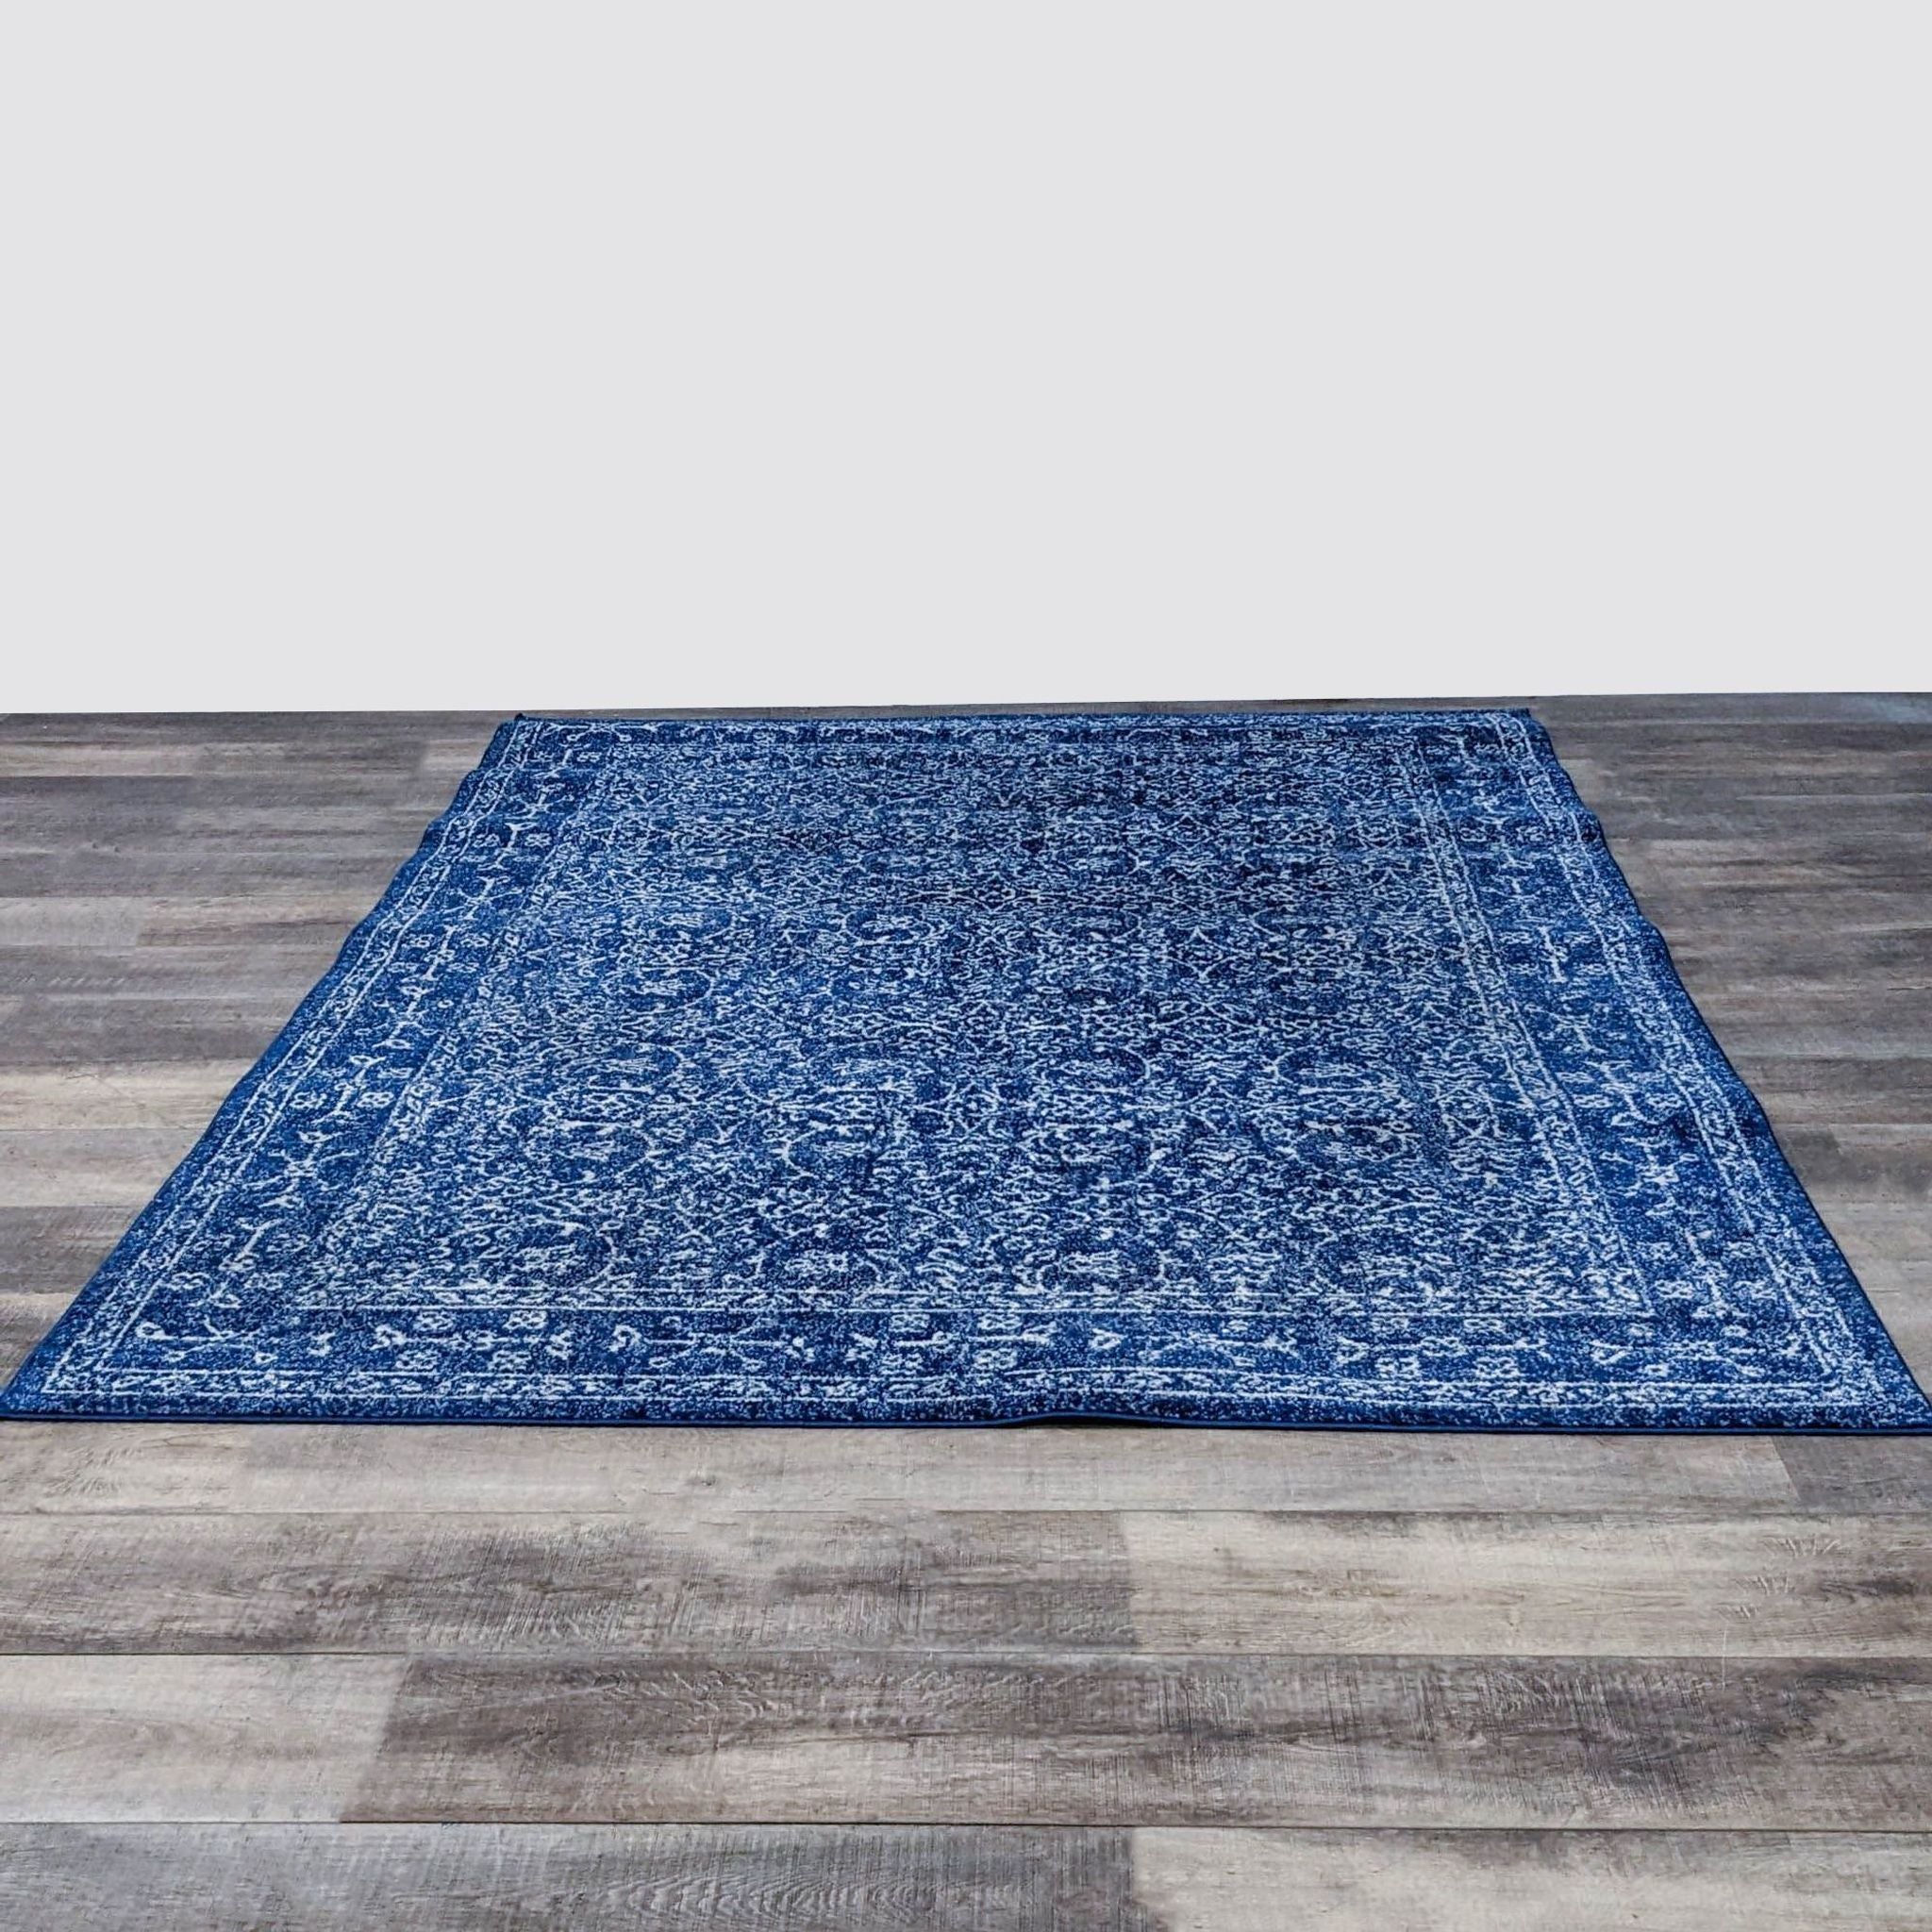 nuLOOM Waddell Vintage Oriental pattern 6'7"x9' area rug with dark blue tones and low pile, displayed on a wooden floor.